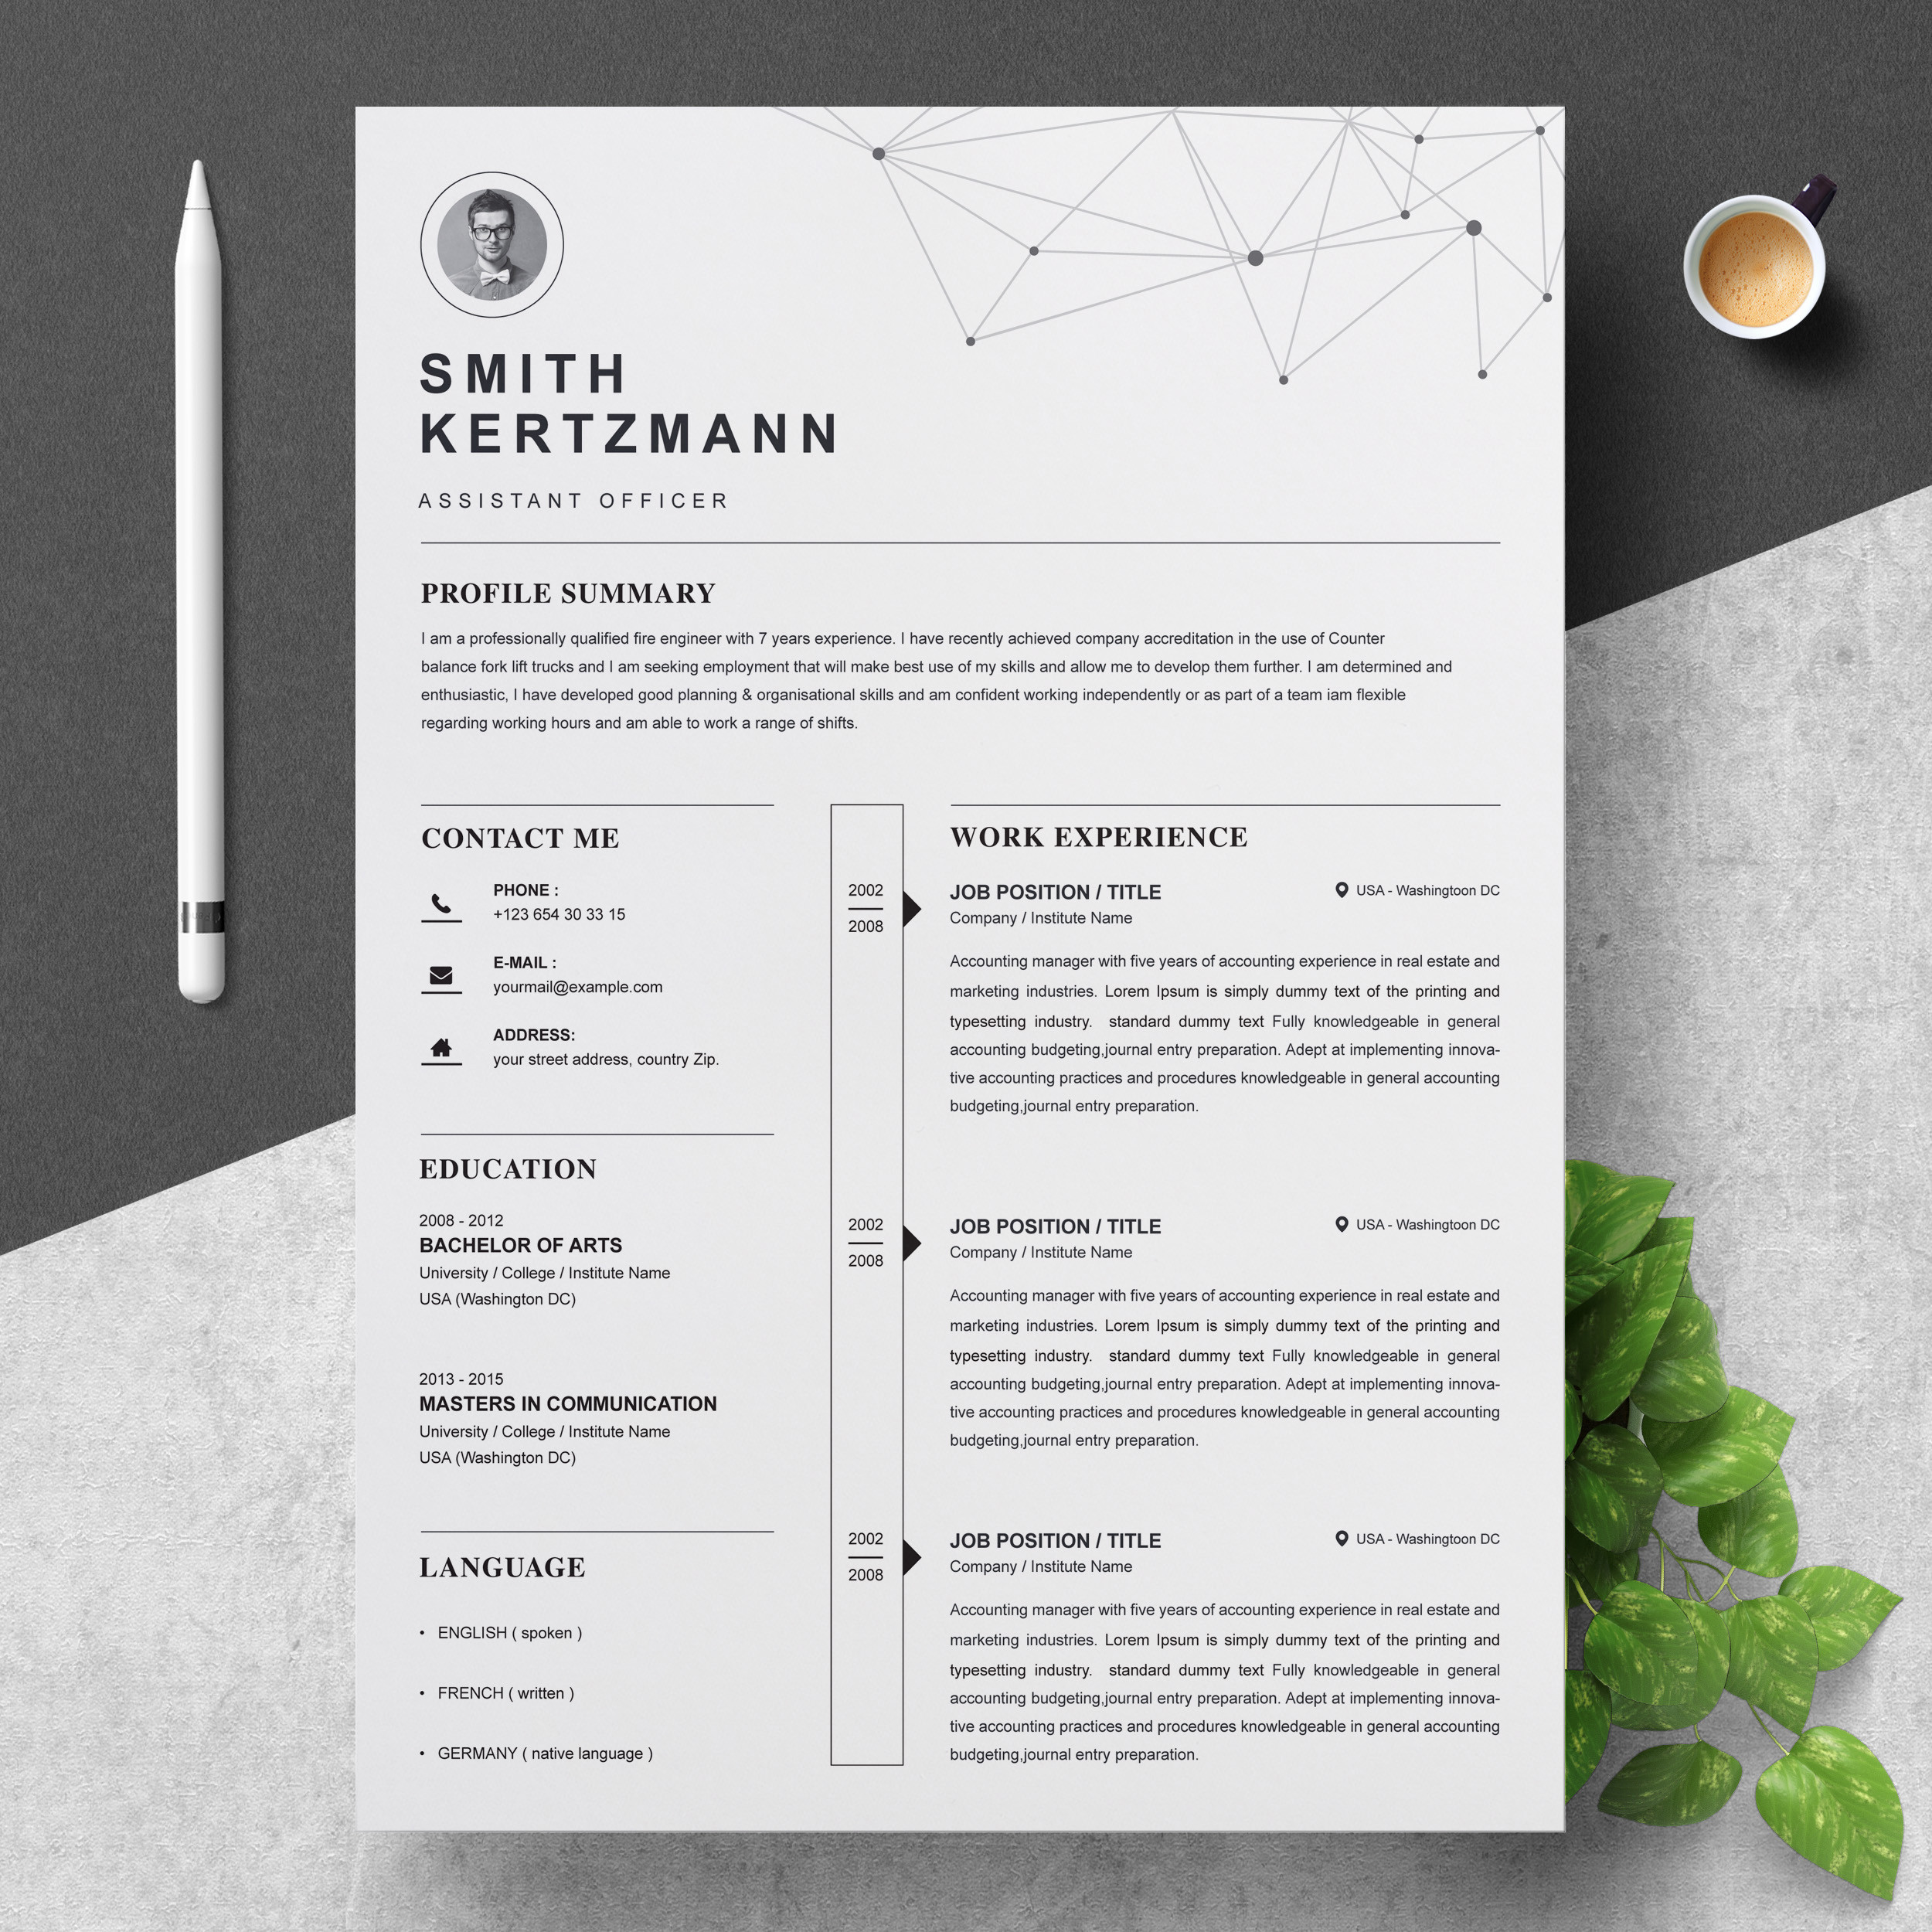 Free Resume Templates for It Professionals Professional Resume Template â Free Resumes, Templates Pixelify.net